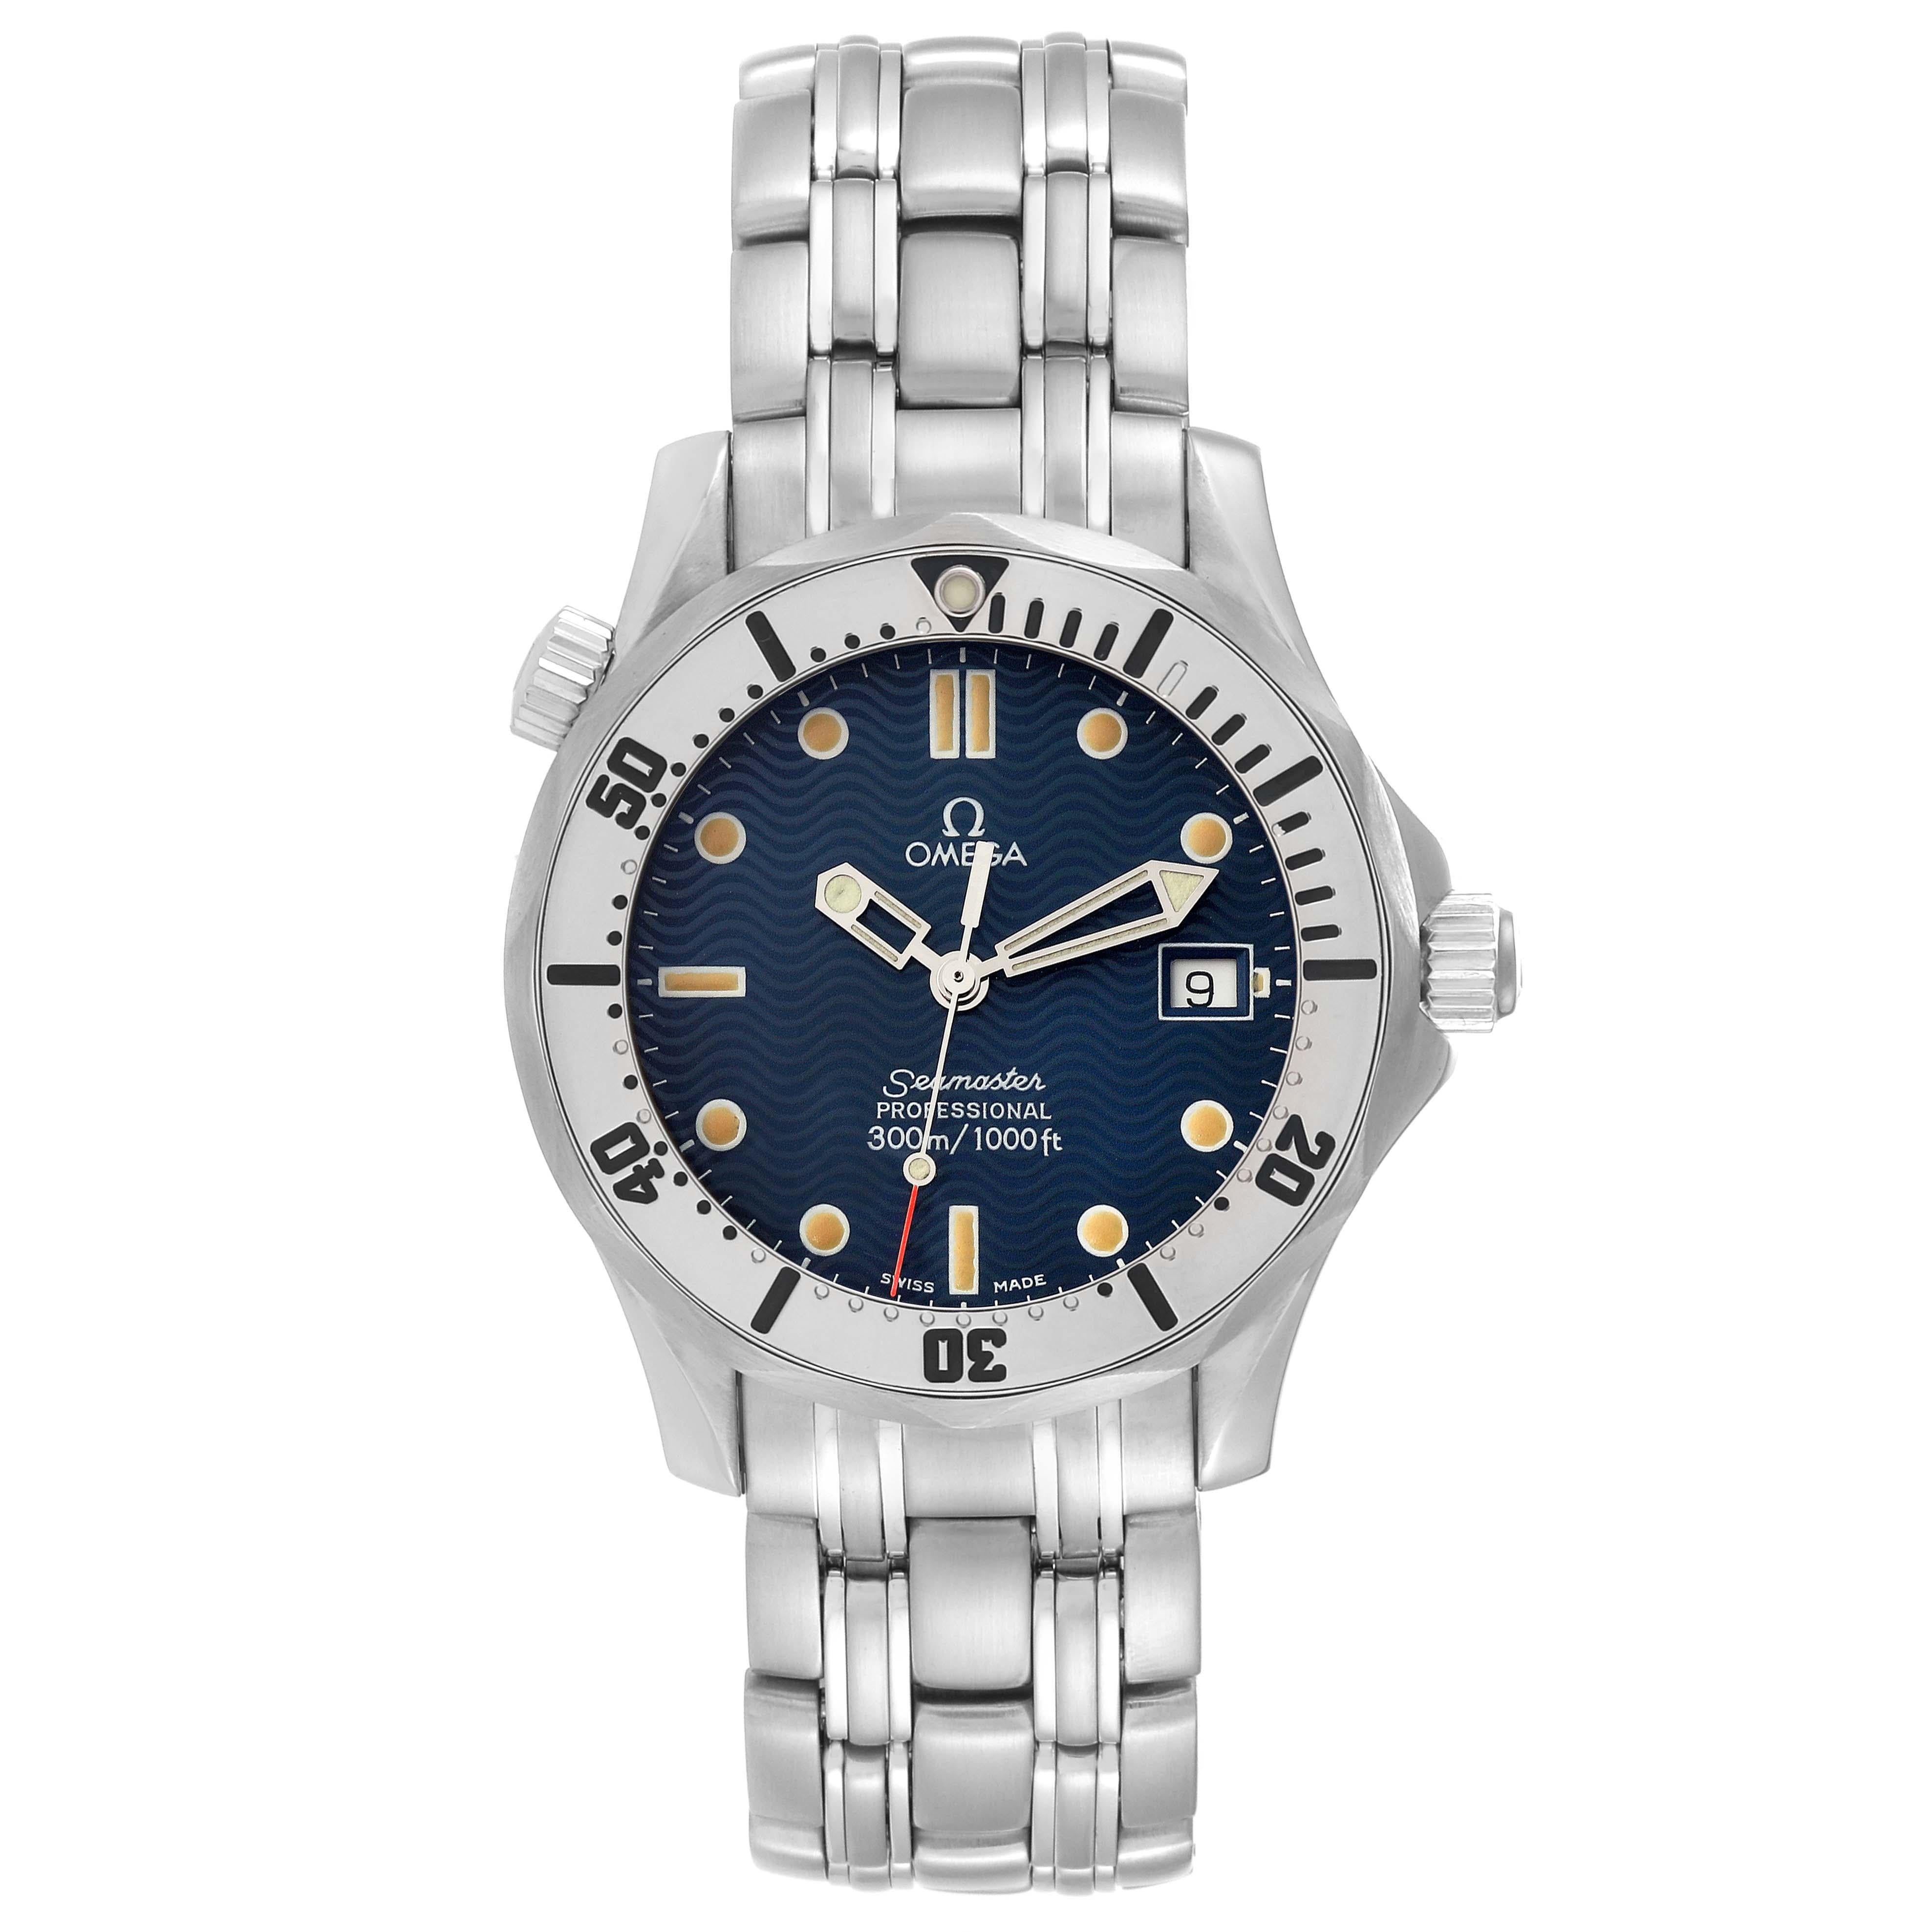 Omega Seamaster 300m Midsize 36mm Steel Mens Watch 2562.80.00. Quartz movement. Stainless steel case 36.25 mm in diameter. Omega logo on crown. Unidirectional rotating stainless steel bezel. Scratch resistant sapphire crystal. Blue wave decor dial